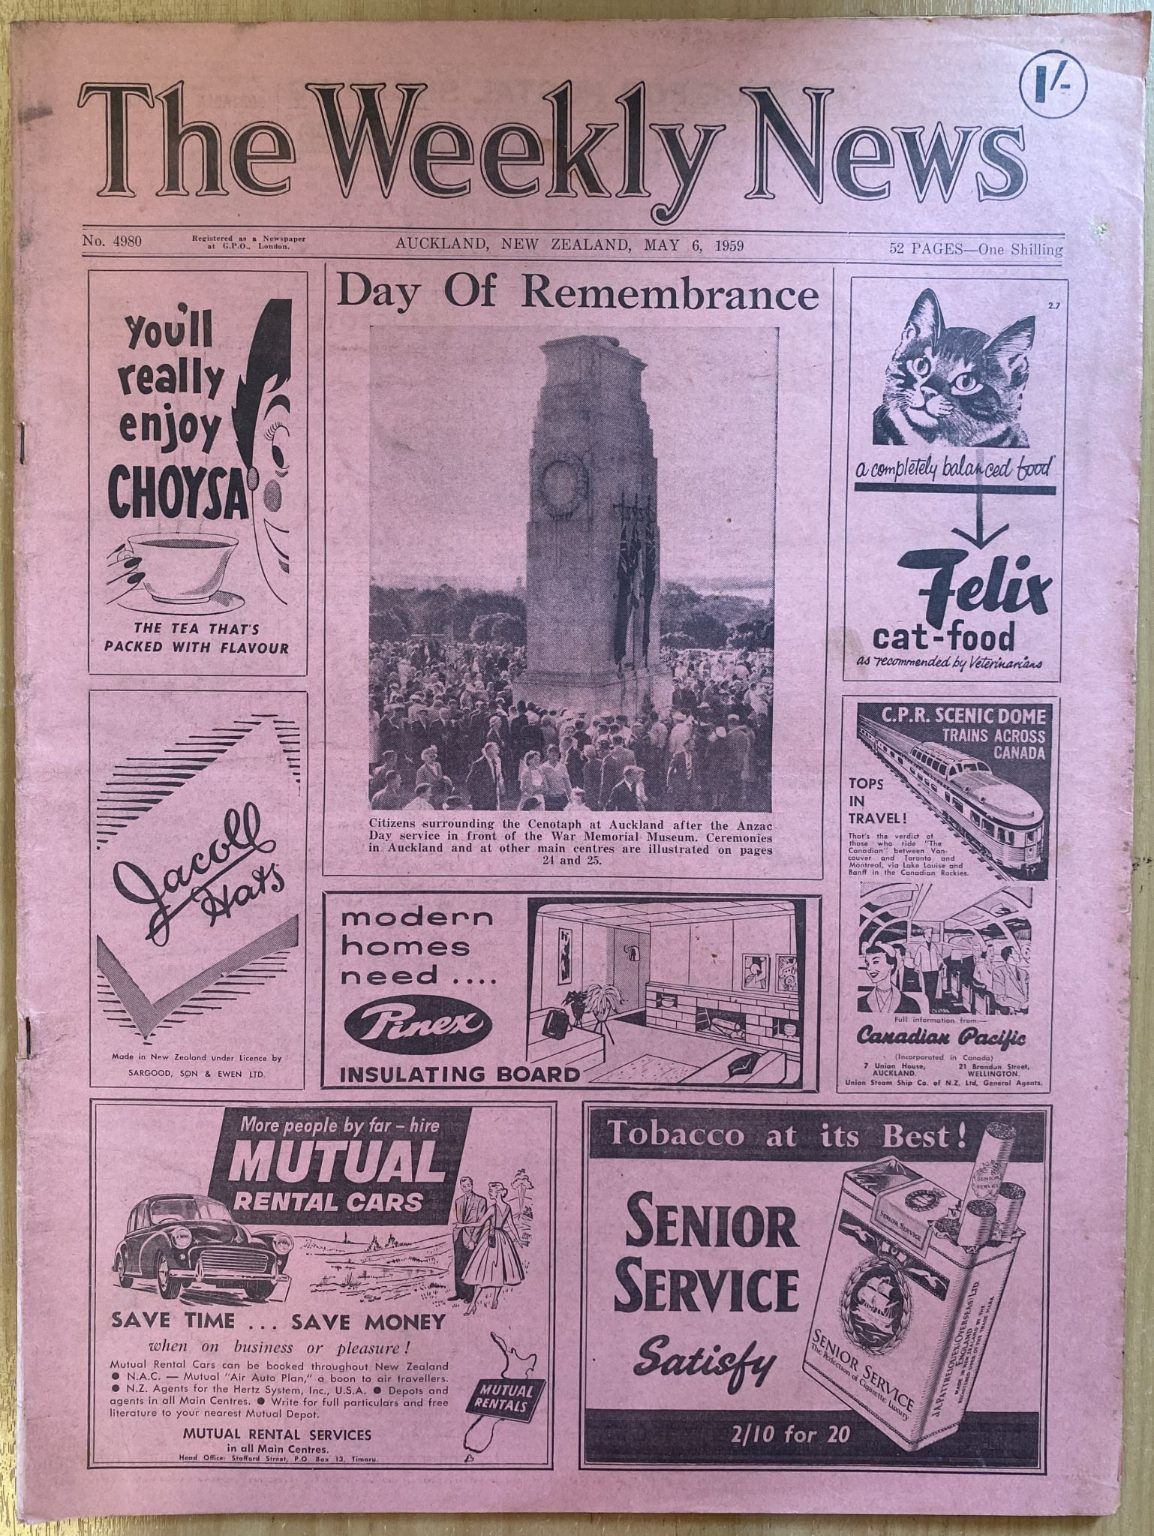 OLD NEWSPAPER: The Weekly News - No. 4980, 6 May 1959